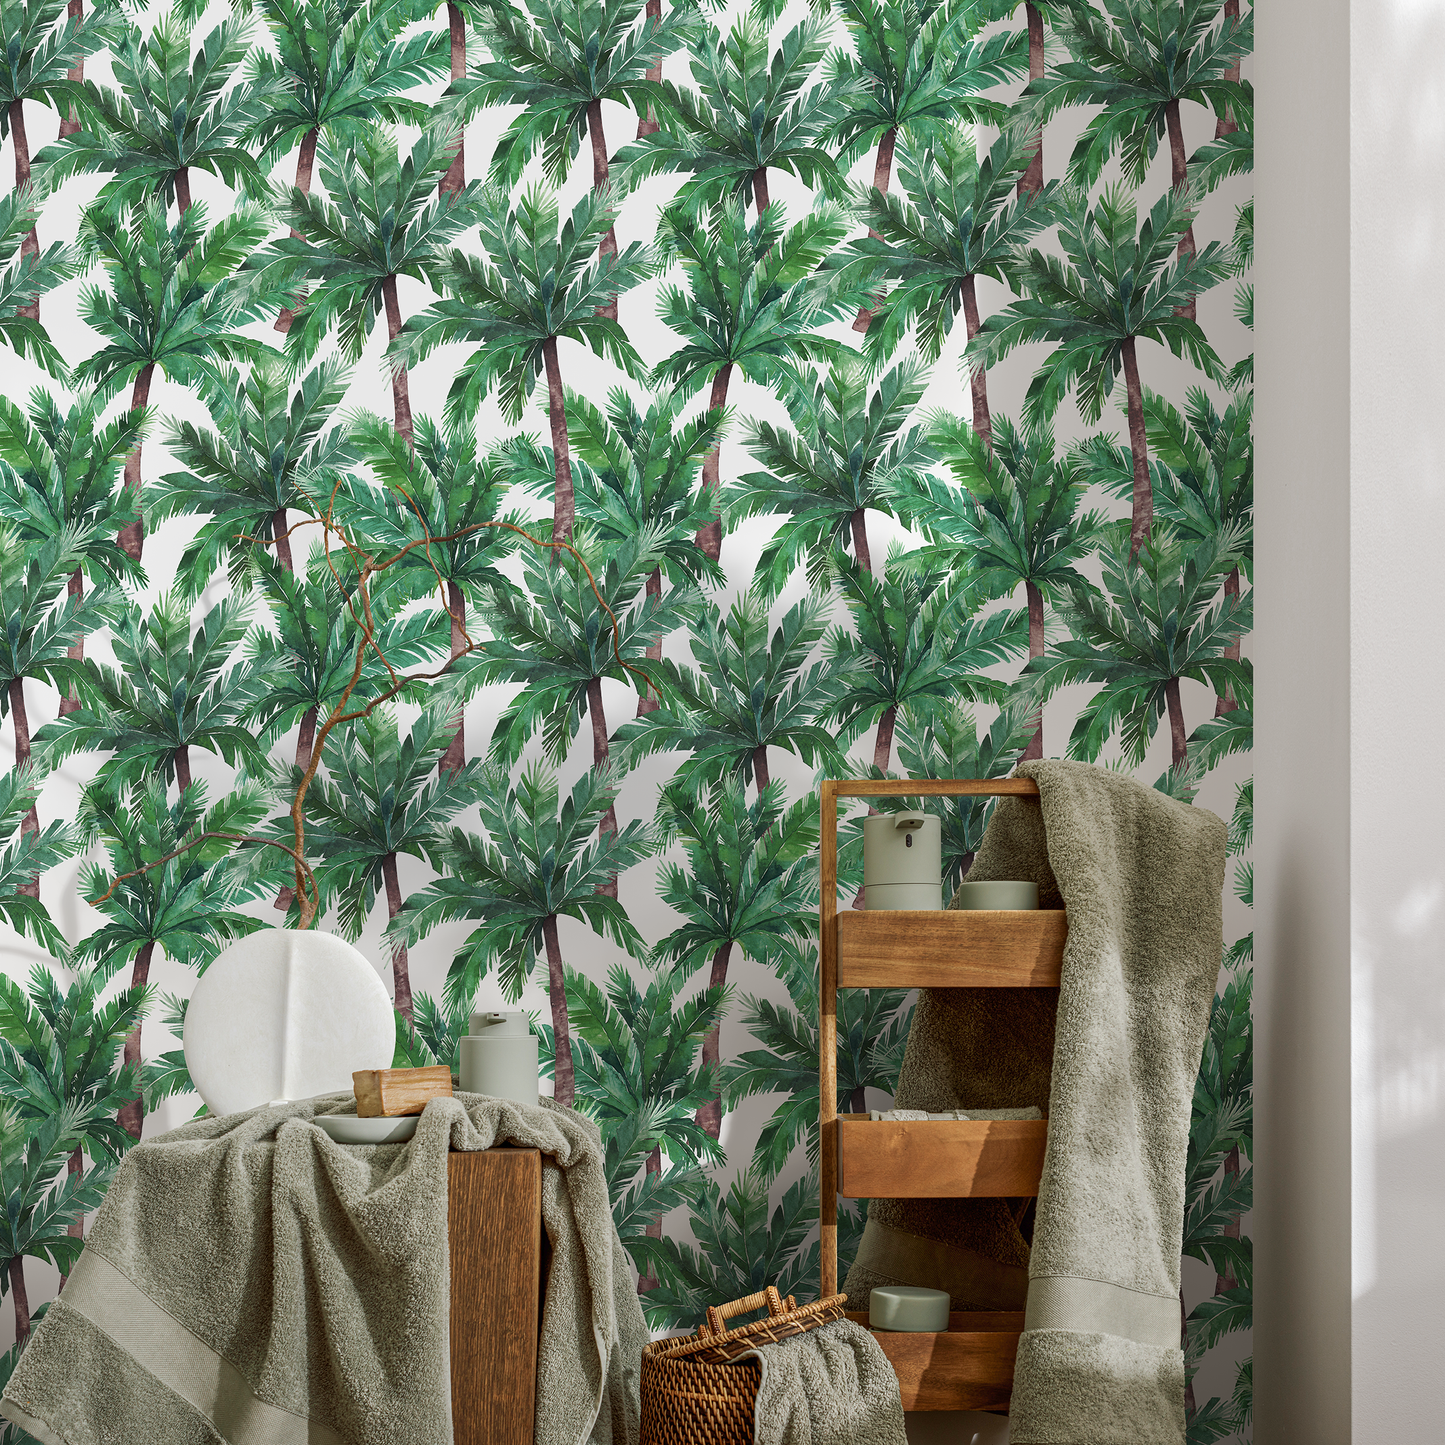 Wallpaper Peel and Stick Wallpaper Removable Wallpaper Home Decor Wall Art Wall Decor Room Decor / Tropical Palms Wallpaper - A019